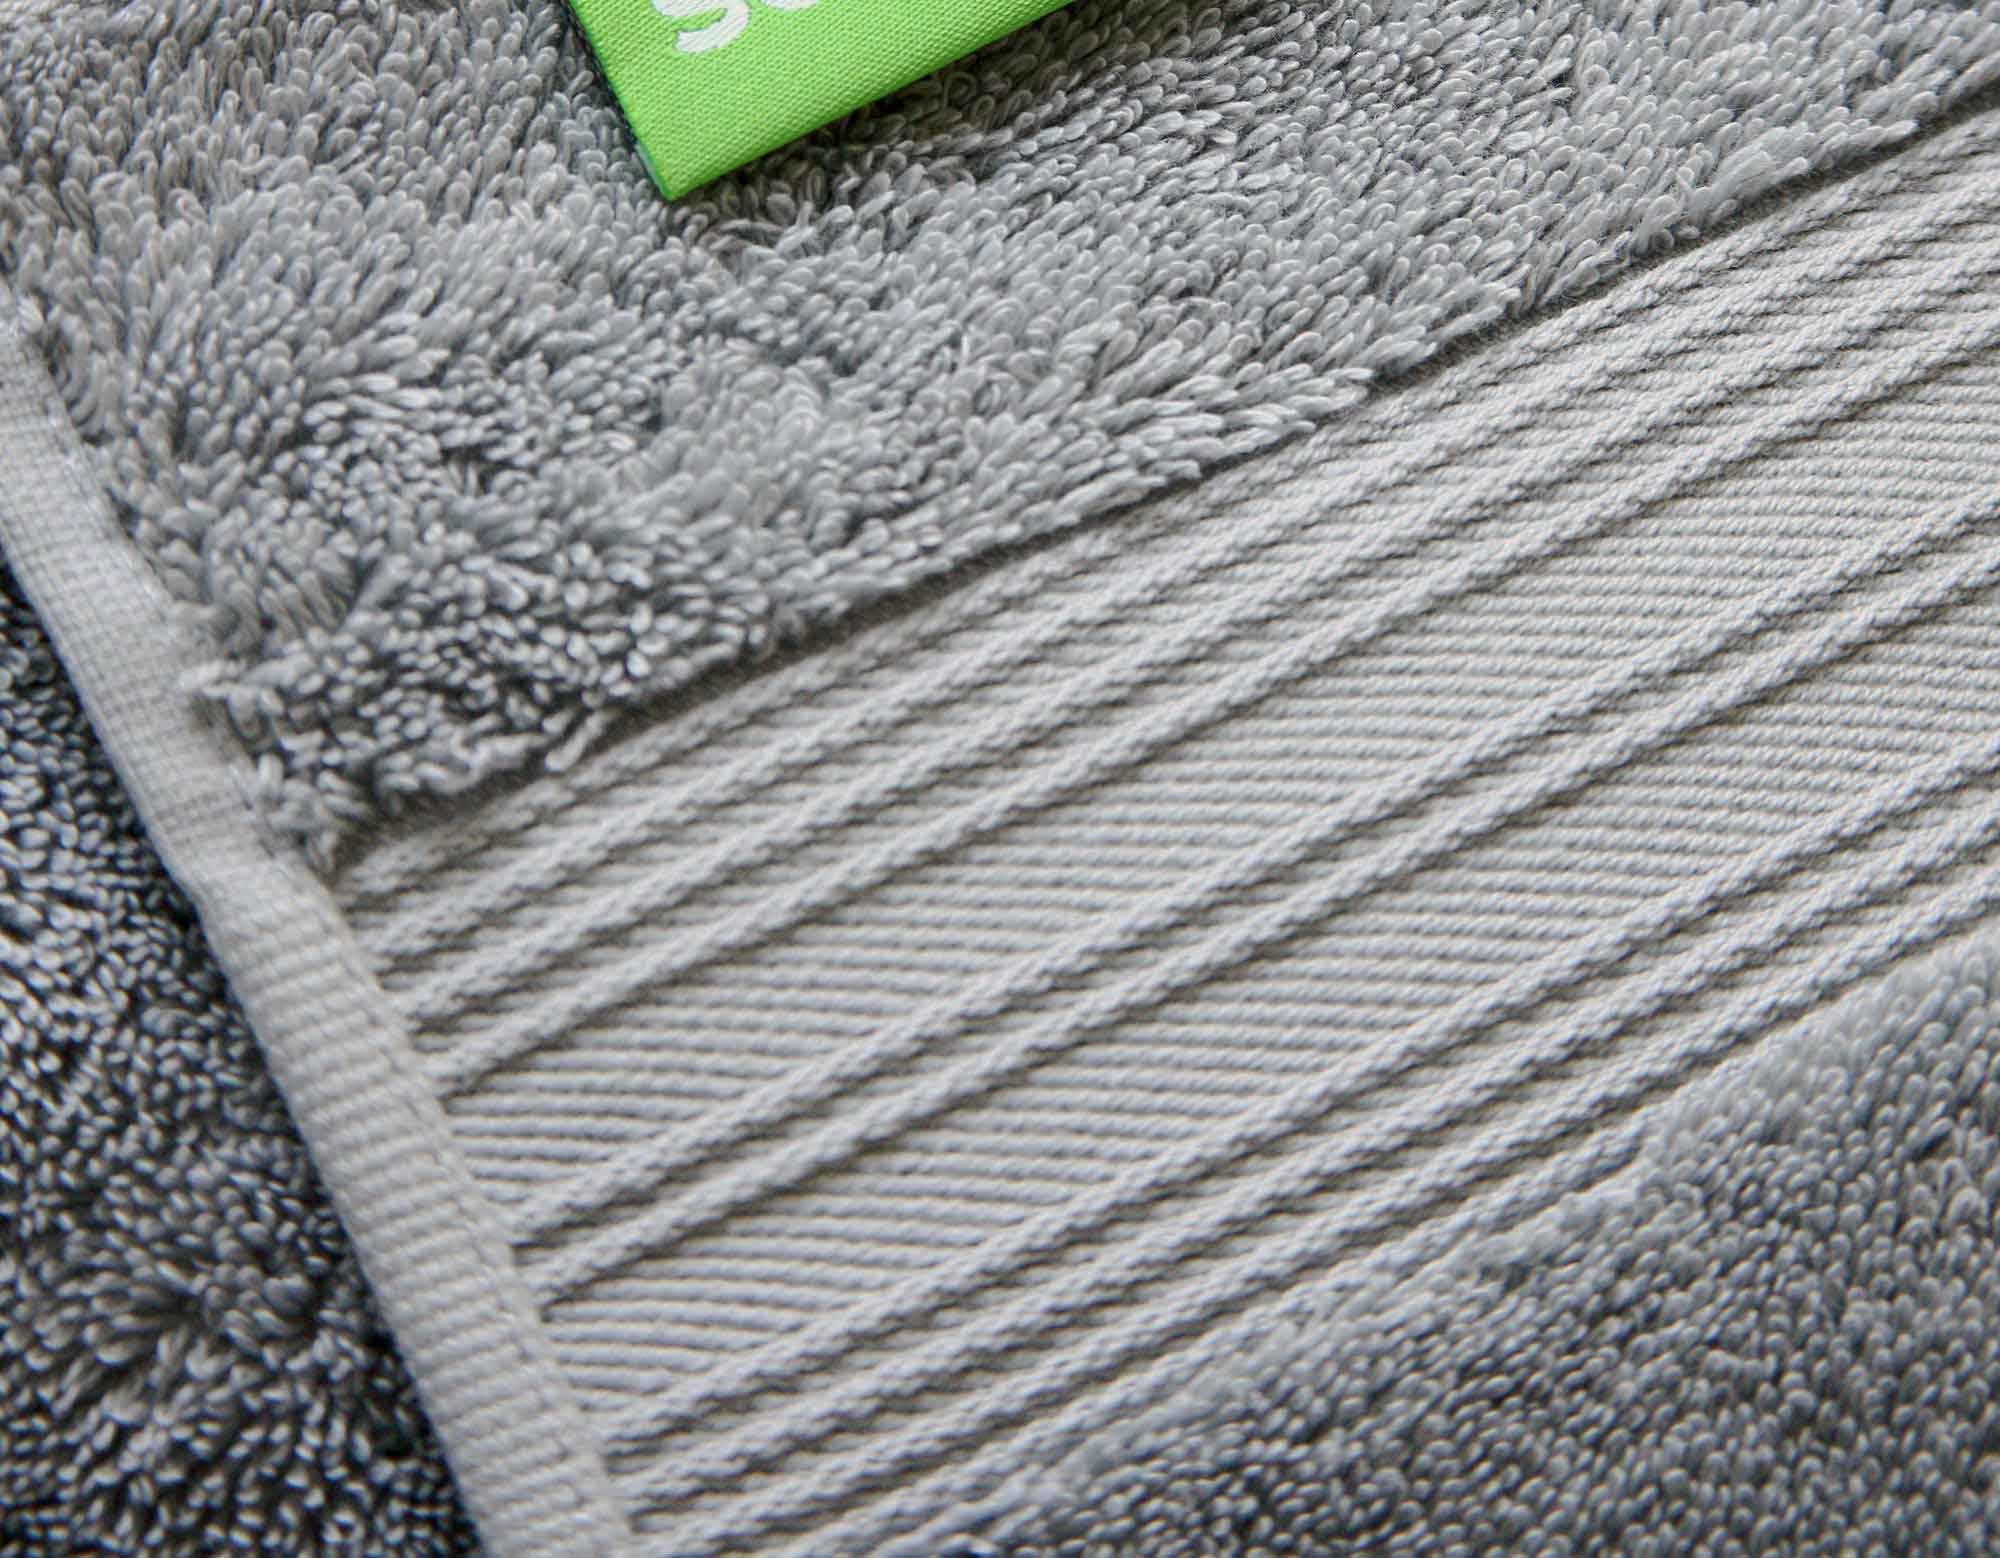 Silver grey cotton bath towel close-up showing details and scooms logo